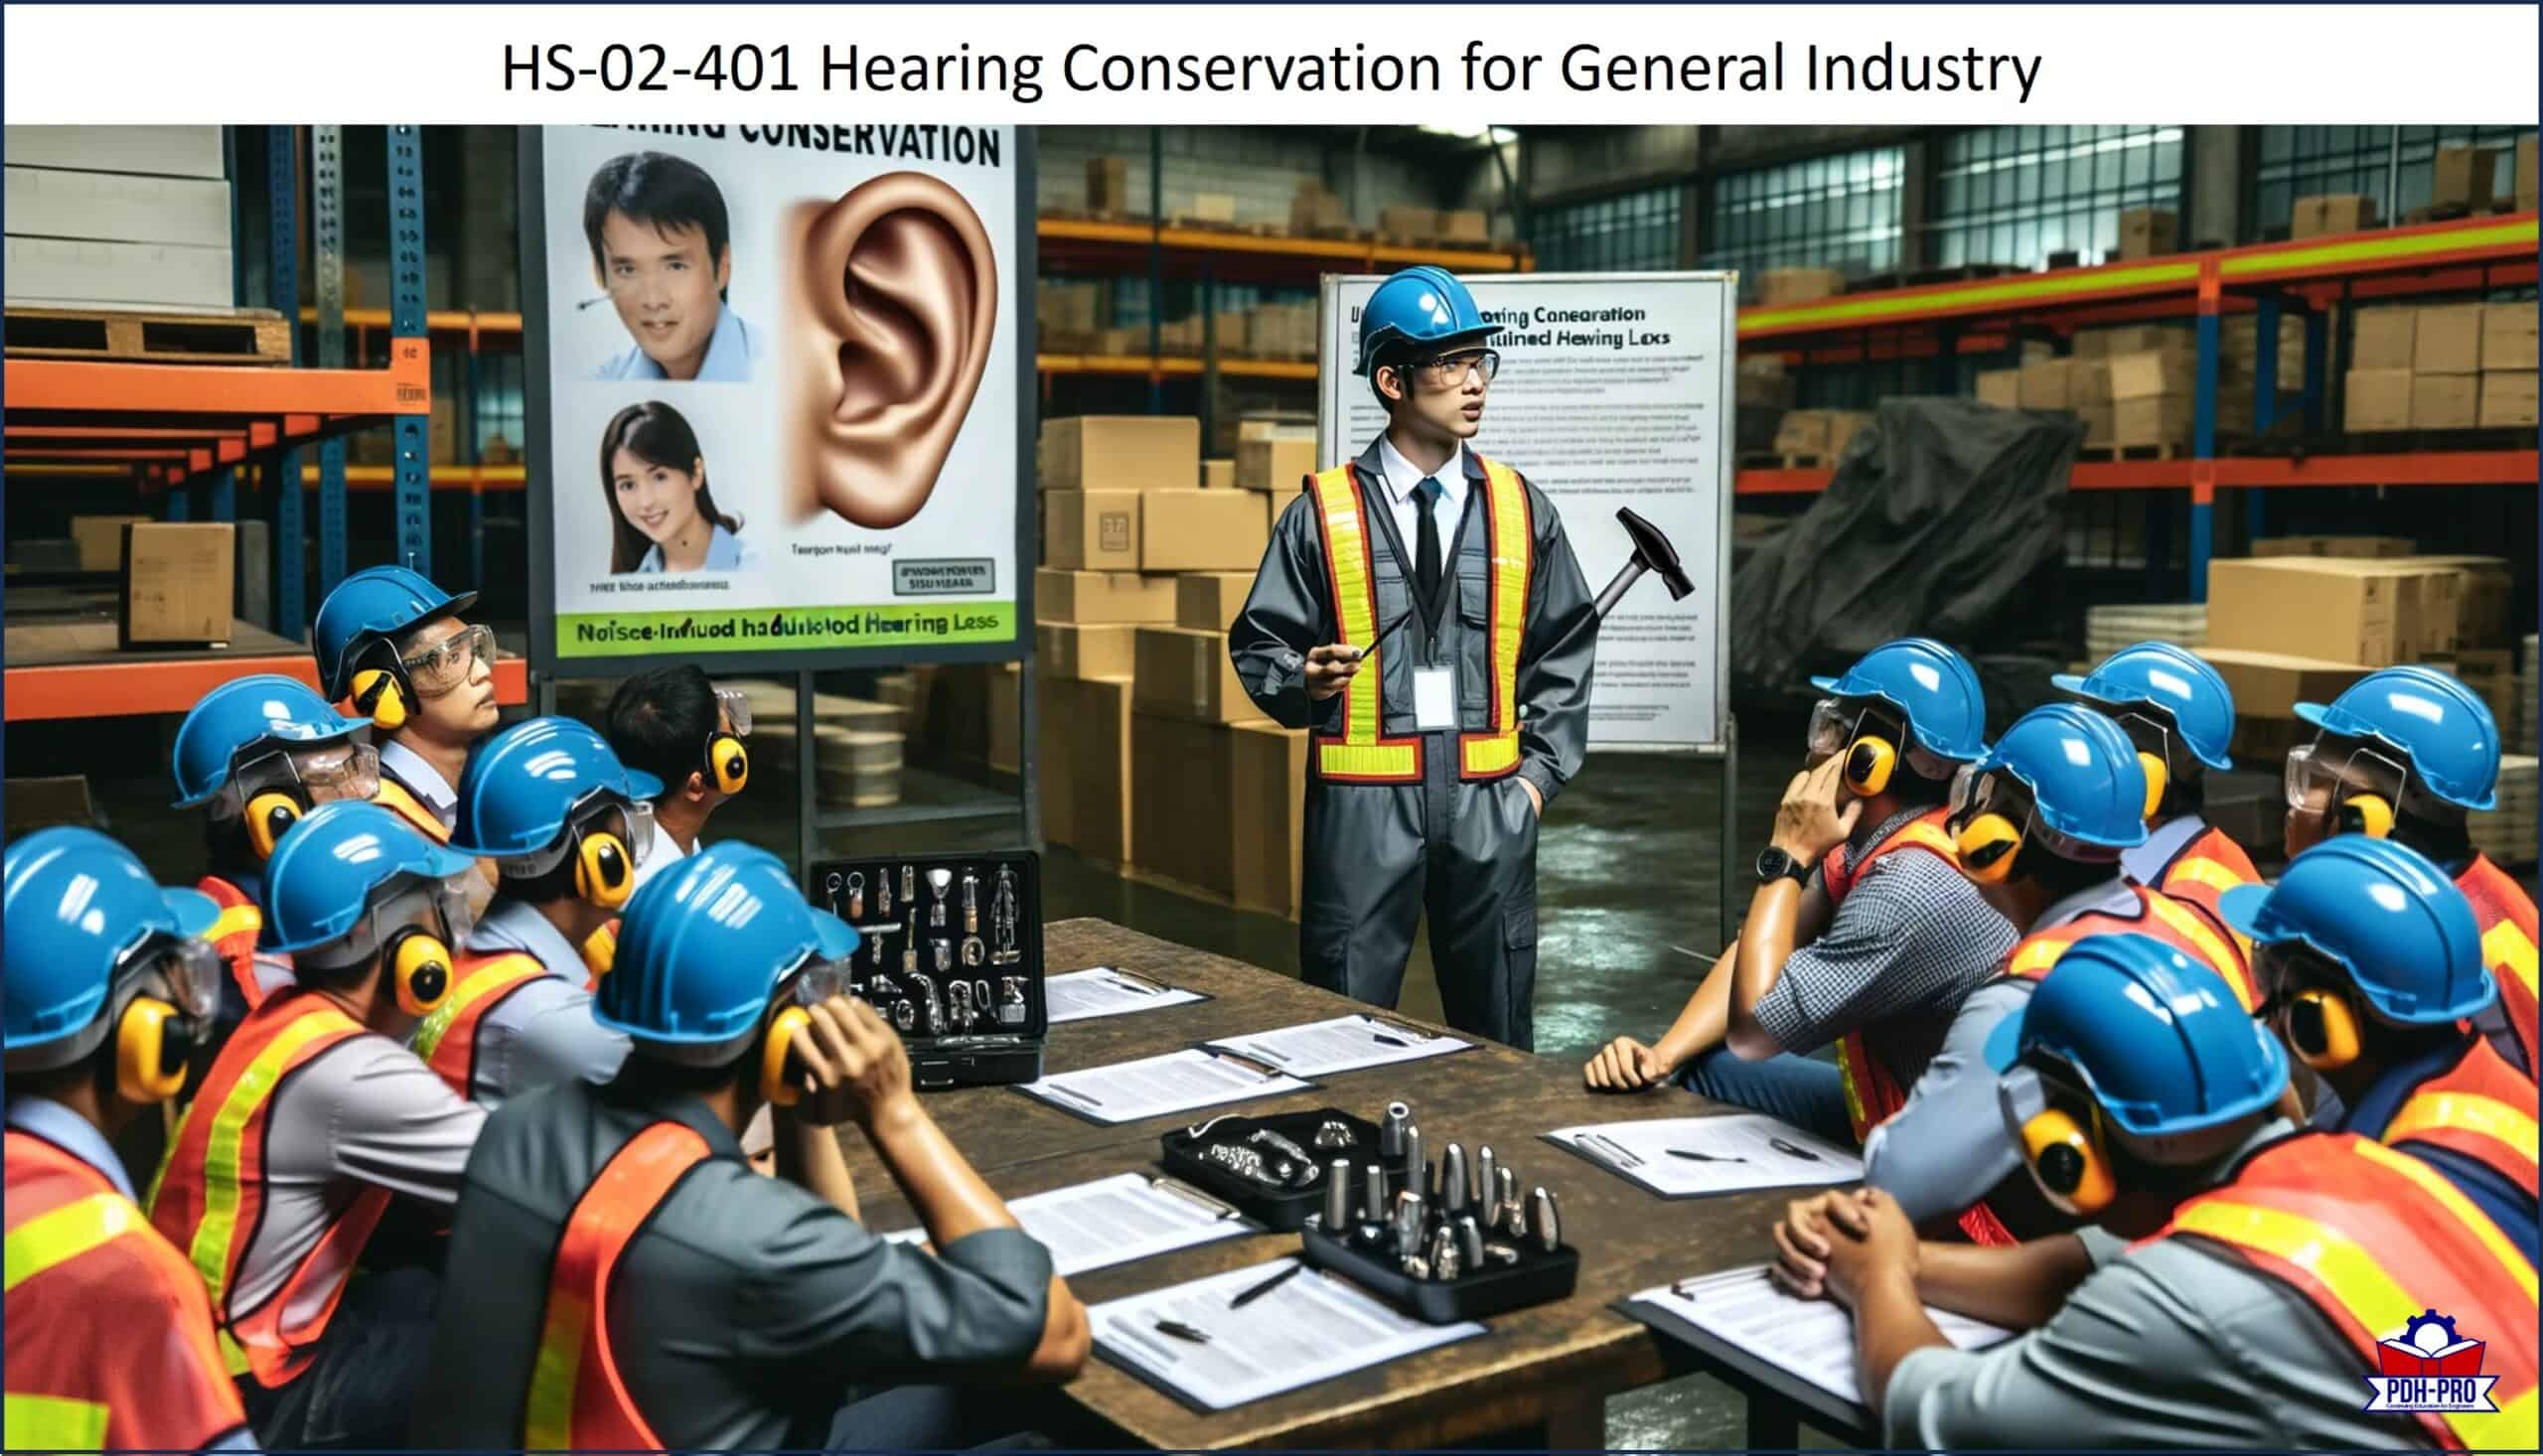 Hearing Conservation for General Industry